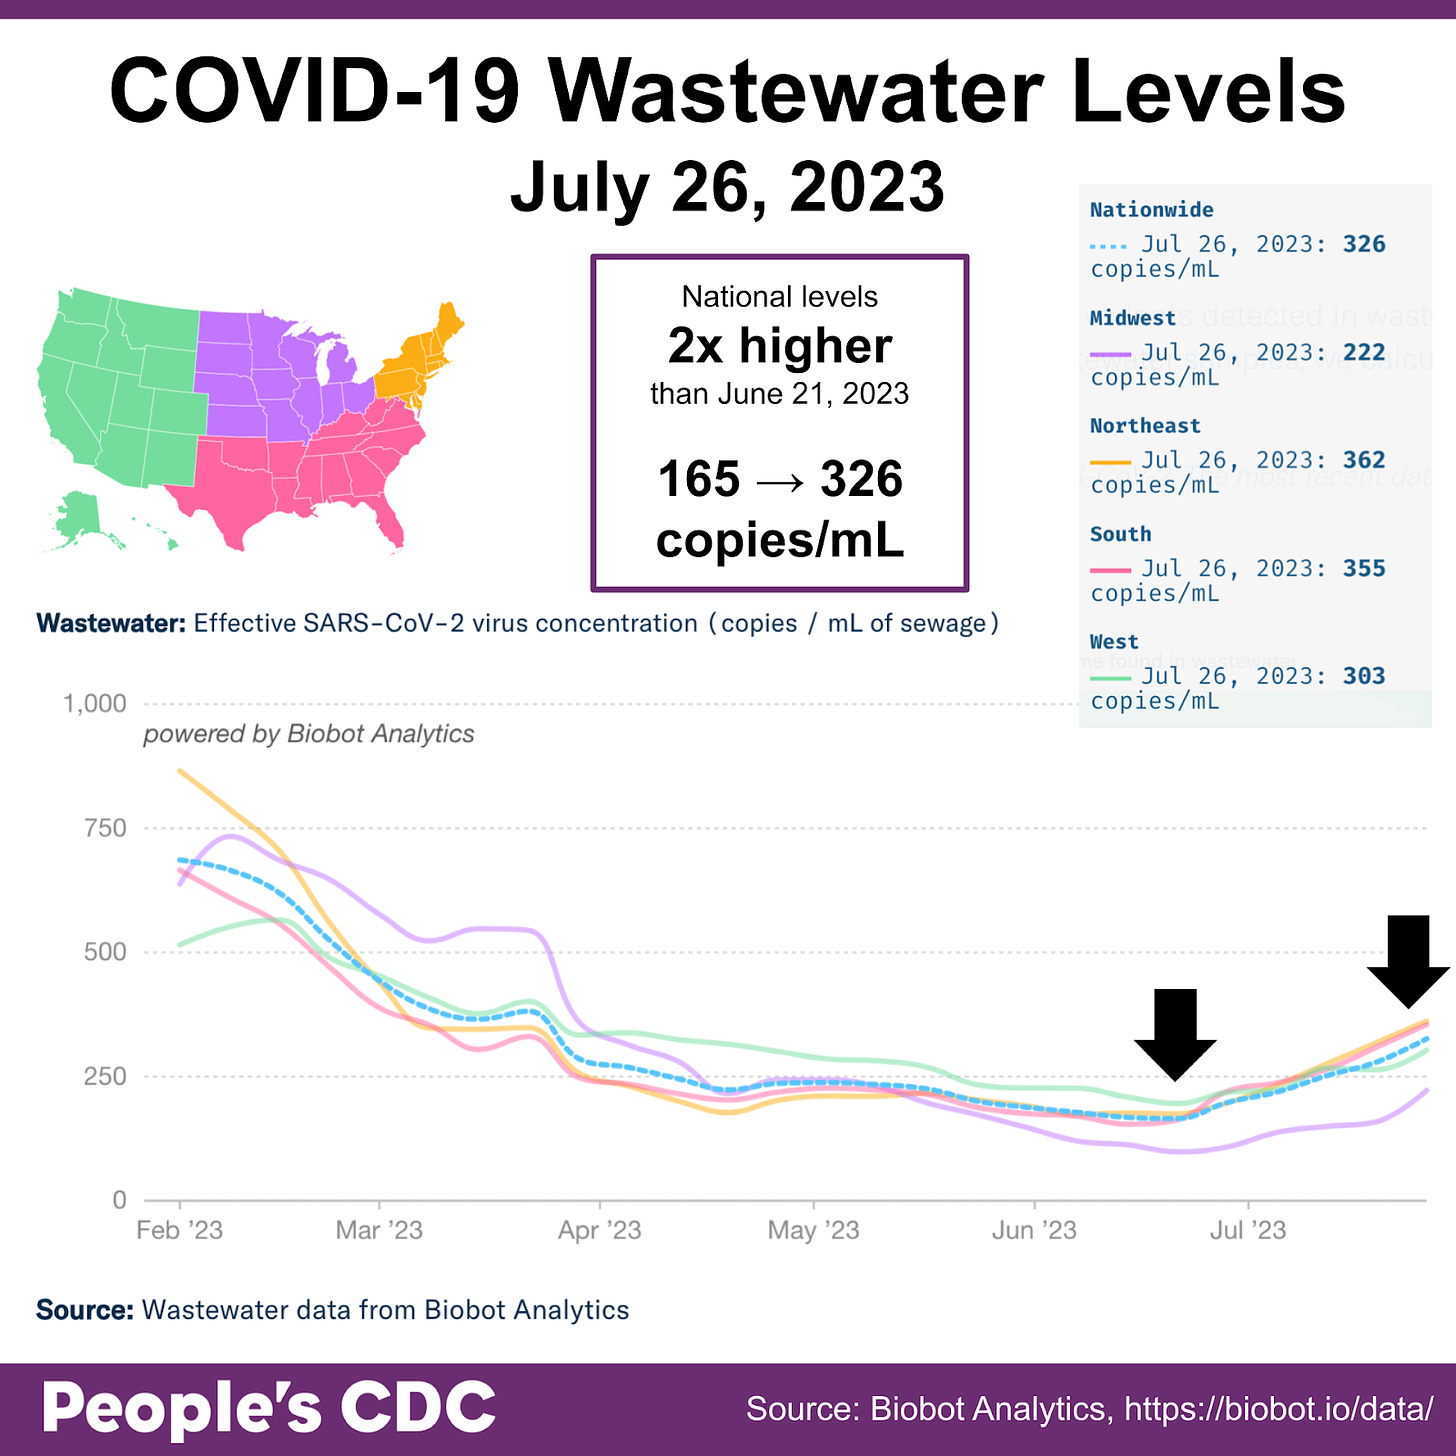 Title reads “COVID-19 Wastewater Levels July 26, 2023.” A map of the United States in the upper right corner serves as a key. The West is green, Midwest is purple, South is pink, and Northeast is orange. A graph on the bottom is titled “Wastewater: Effective SARS-CoV-2 virus concentration (copies / mL of sewage).” It shows Feb 2023 through July 2023 with regional virus concentrations increasing nationally, throughout all the regions, over the course of the past few weeks (albeit with some weeks of plateauing levels), with black arrows indicating June 21 and July 26. Text above the graph reads “National levels 2x higher than June 21, 2023, 165 to 326 copies/mL.” A key on the upper right states concentration as of July 26, 2023: 326 copies / mL (National), 222 copies / mL (Midwest), 362 copies / mL (Northeast), 355 copies / mL (Southeast), and 303 copies / mL (West).